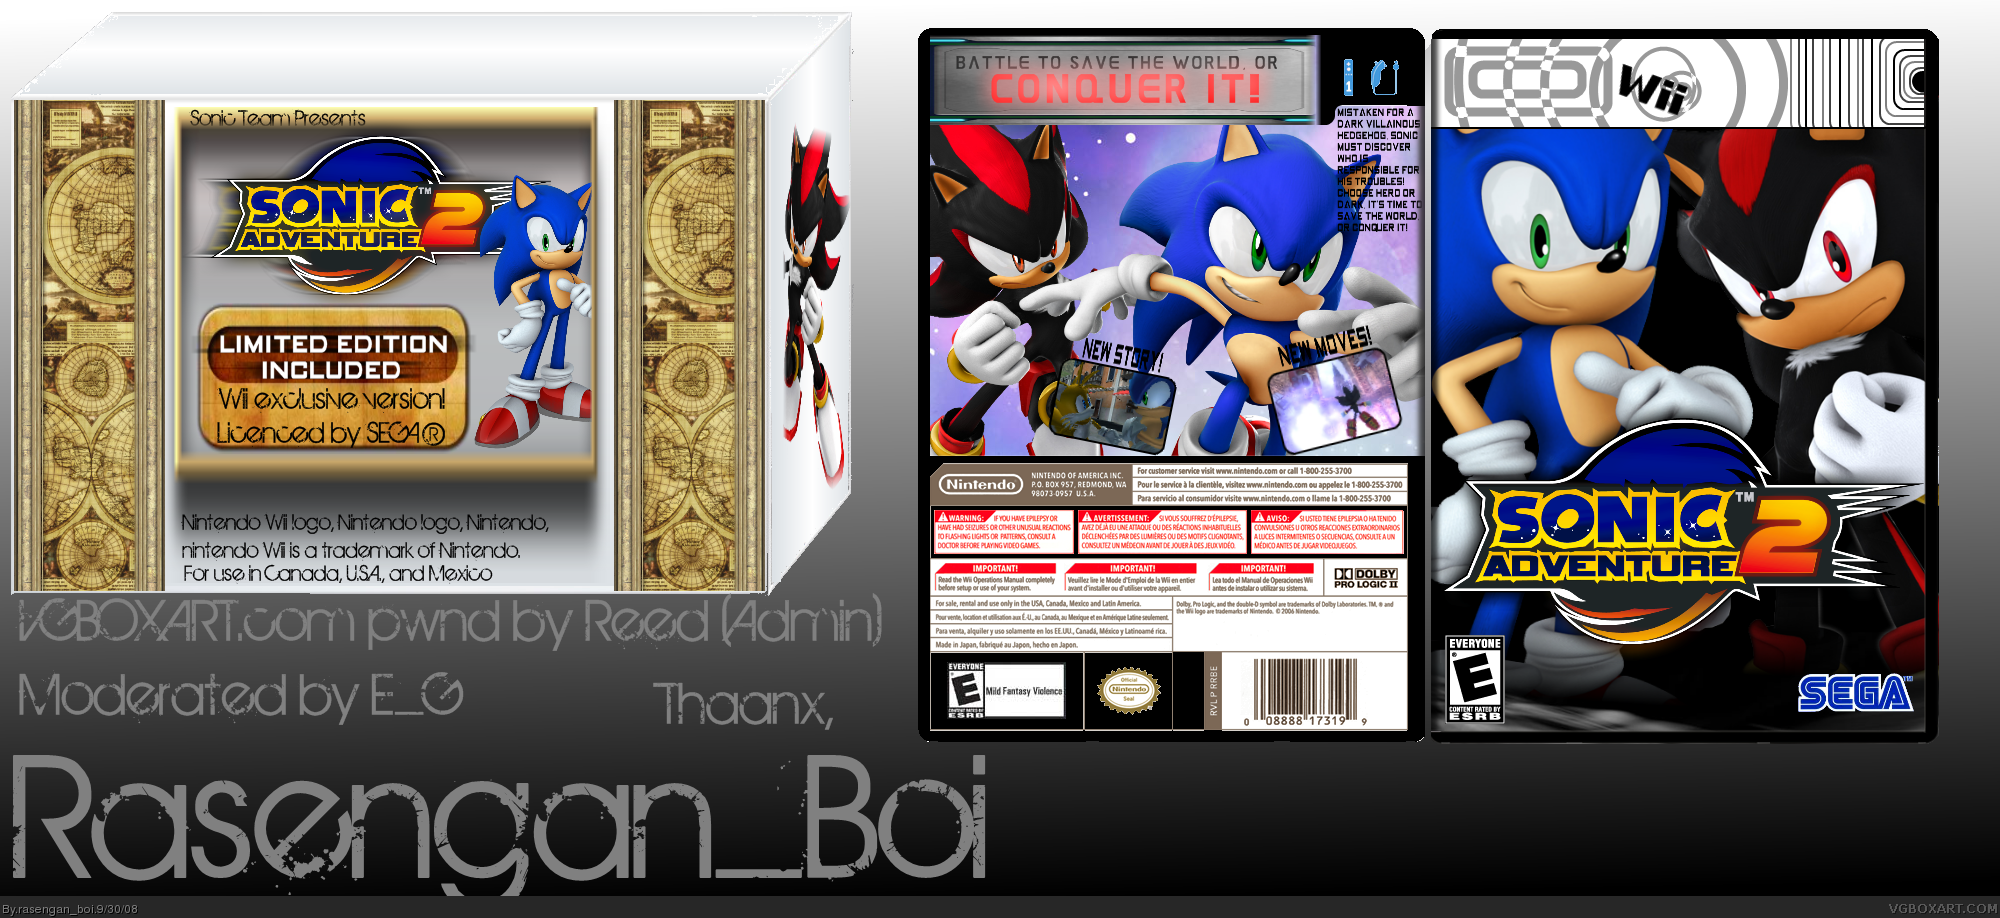 Sonic Adventure 2 + Wii Combo Pack box cover